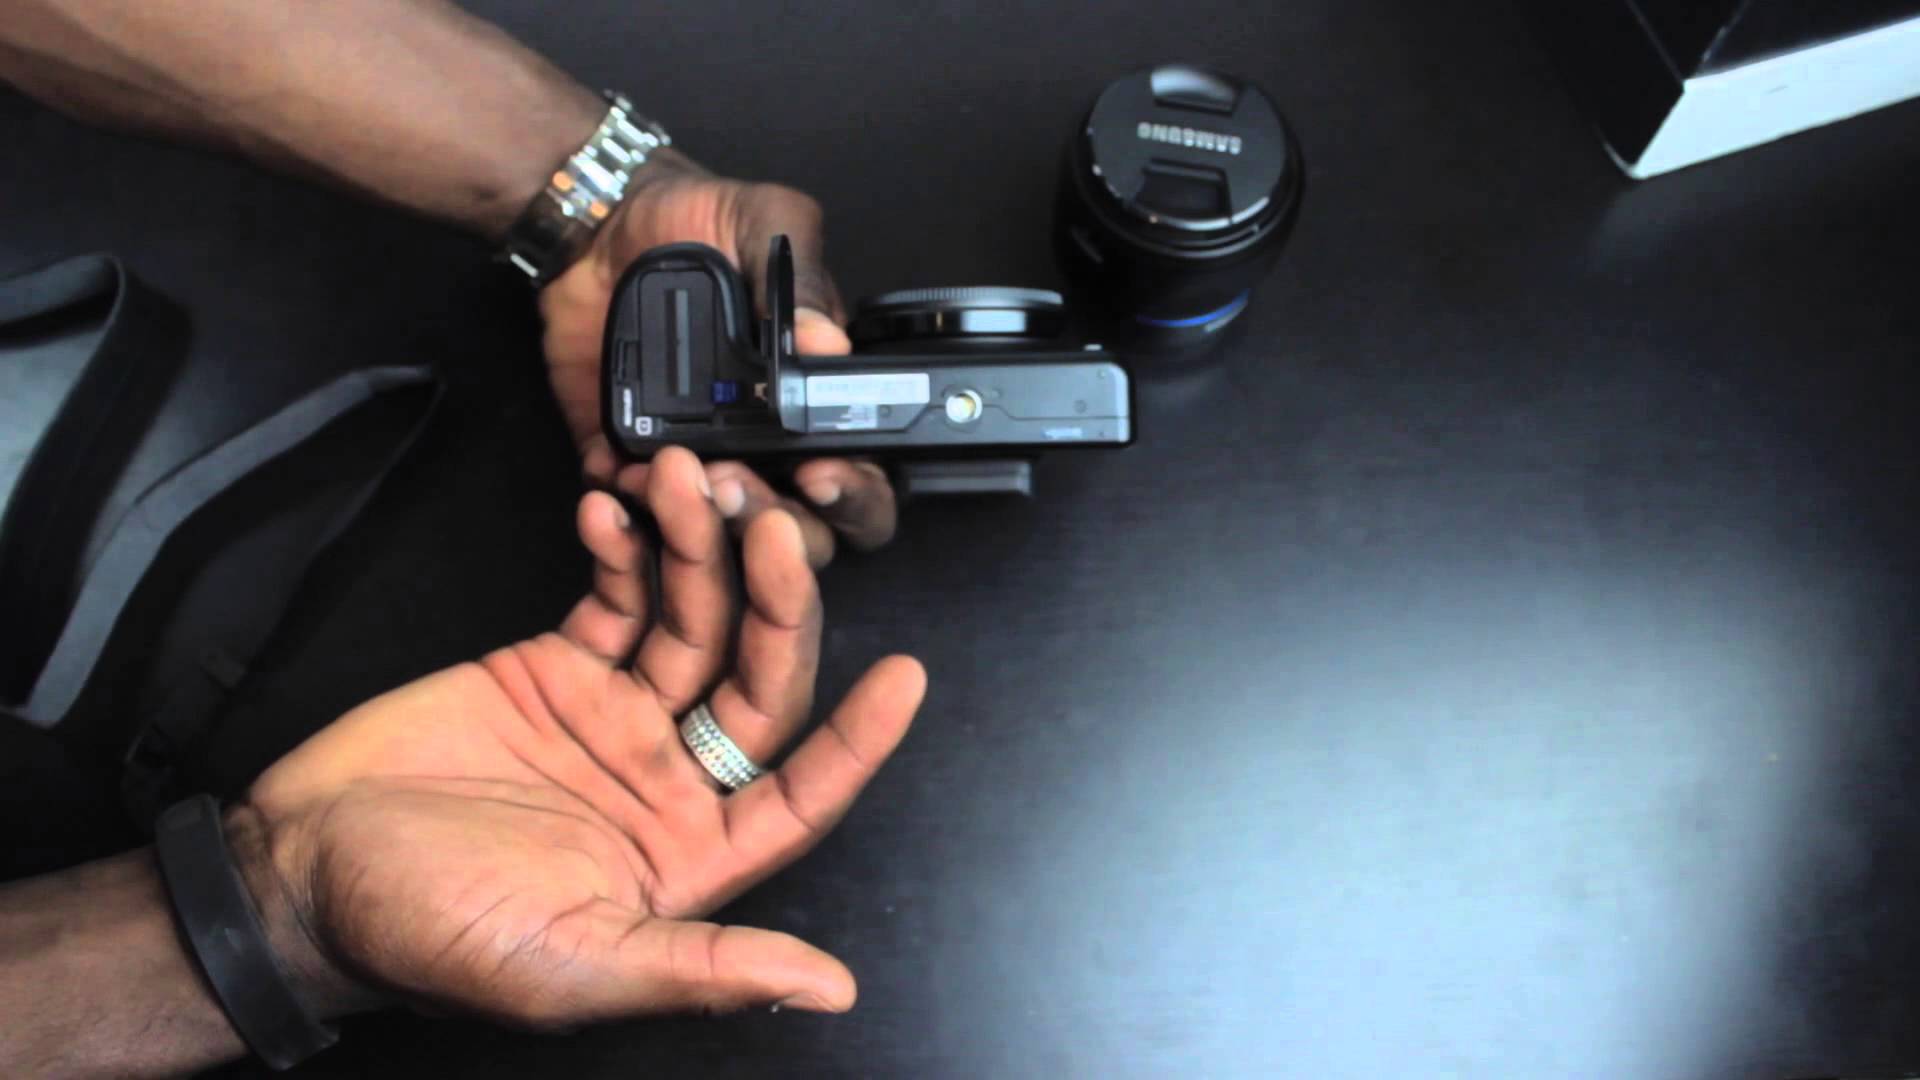 Samsung Galaxy NX Android Compact Camera Overview